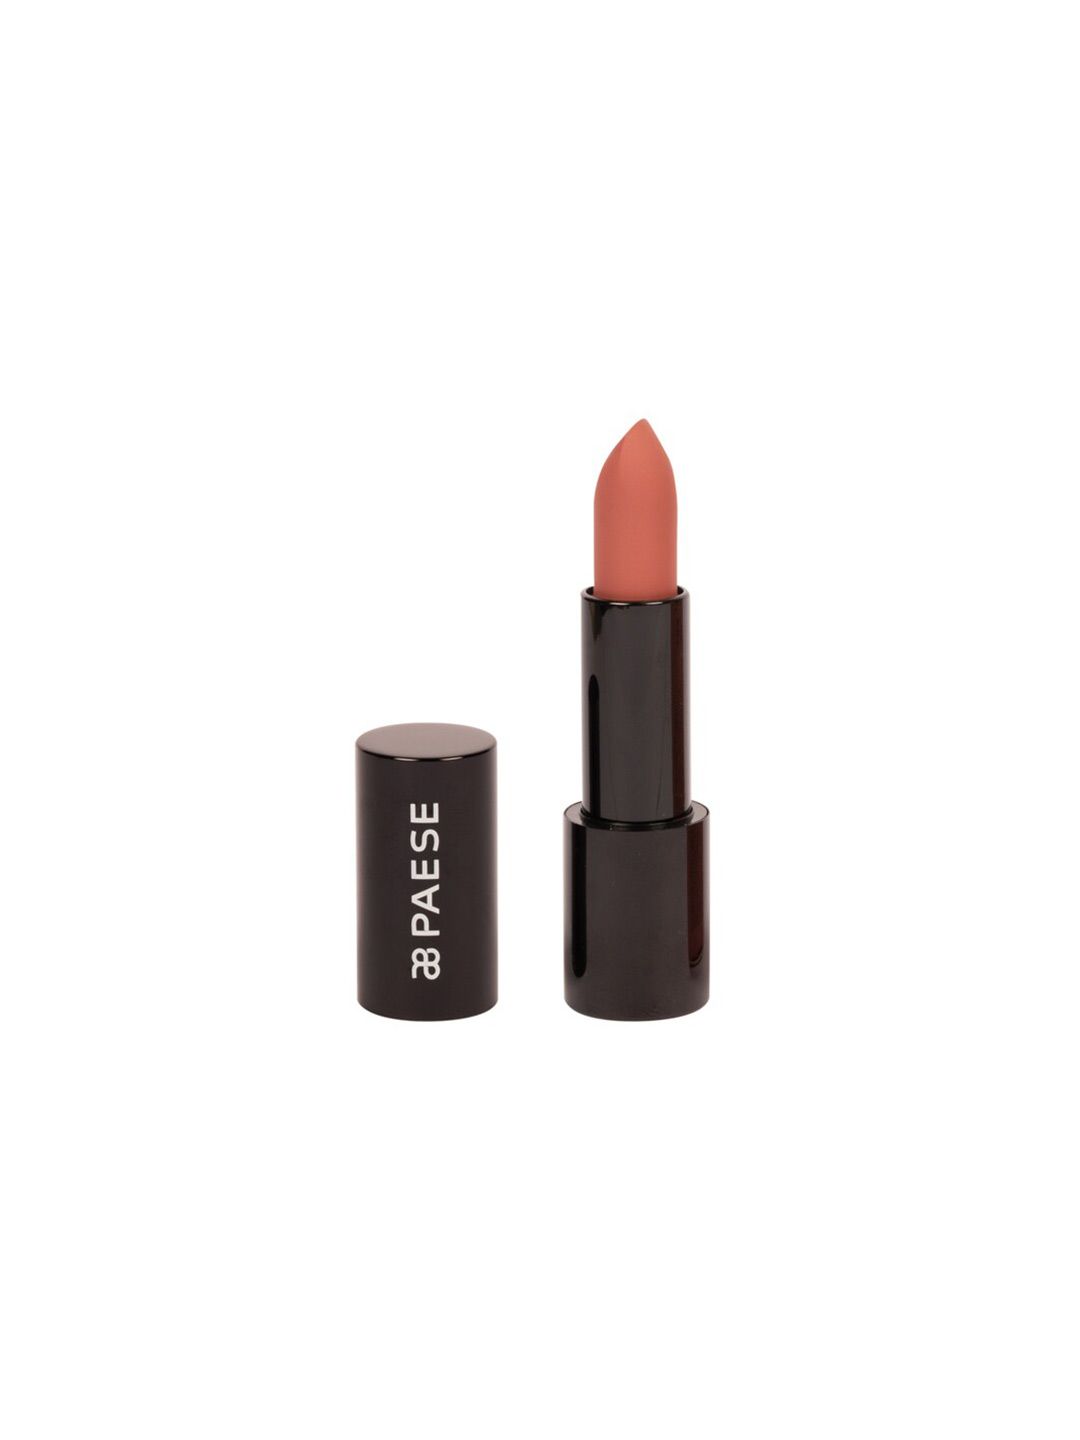 Paese Cosmetics Mattologie Matte Lipstick with Rice Oil 4.3 g - Total Nude 103 Price in India